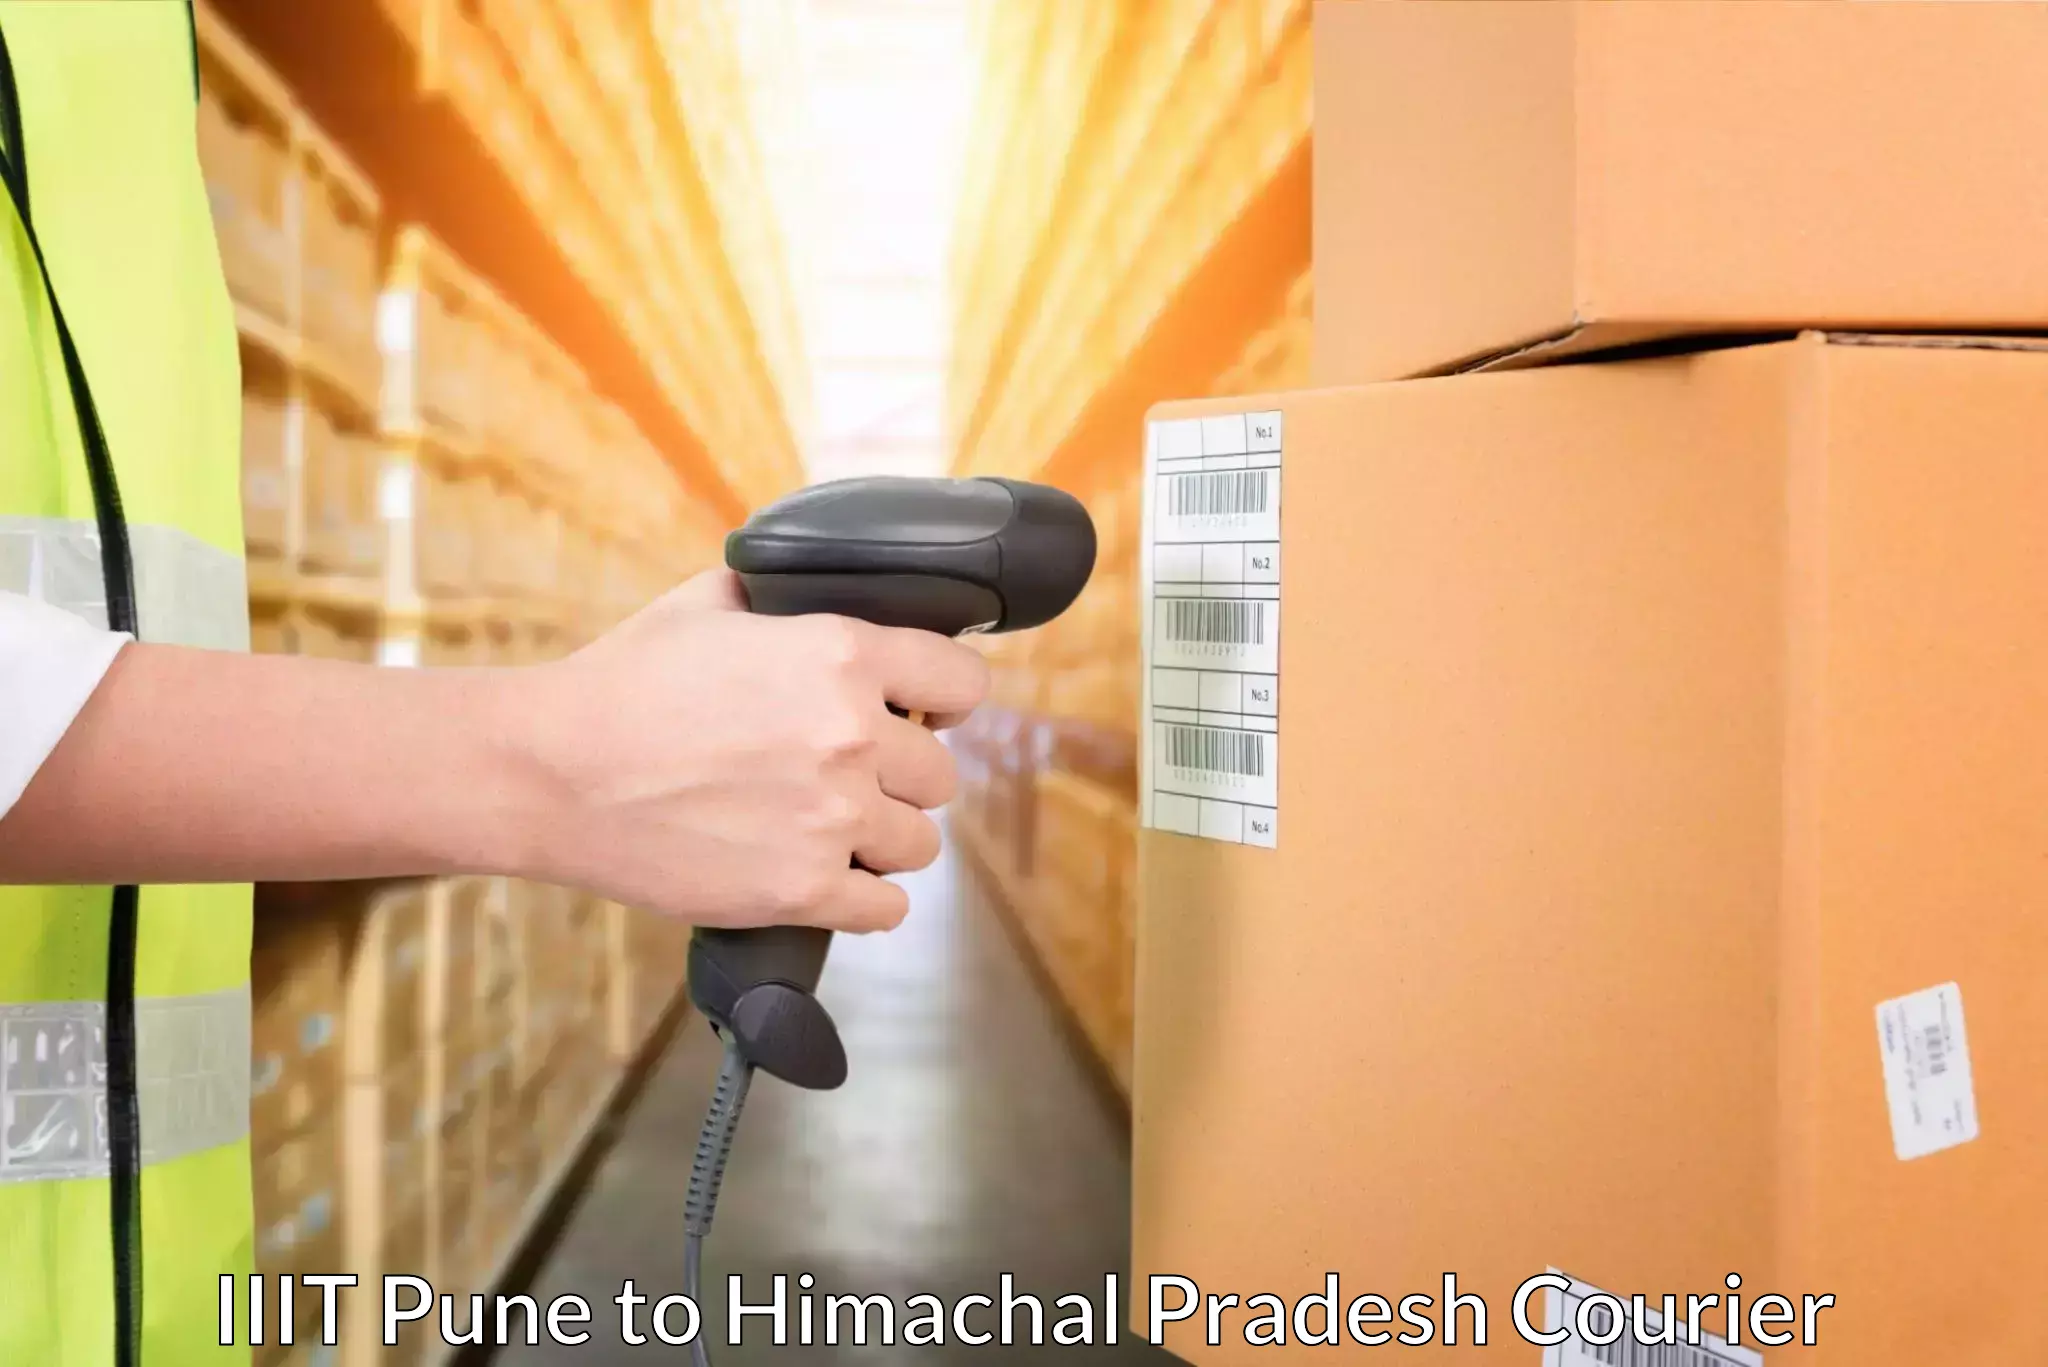 Package consolidation IIIT Pune to YS Parmar University of Horticulture and Forestry Solan